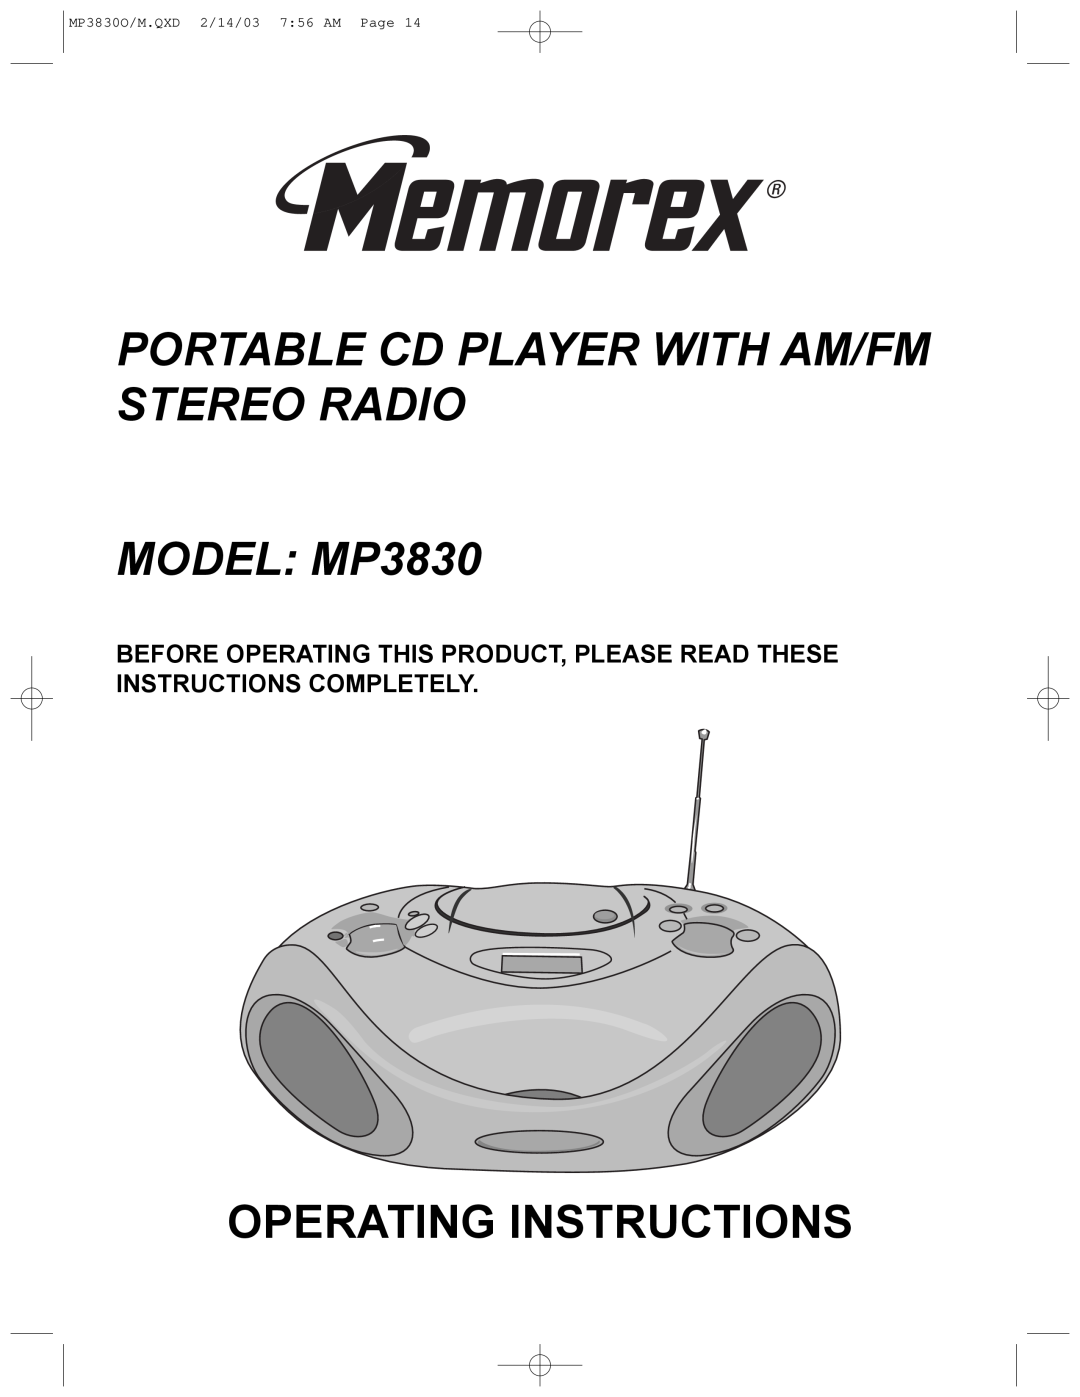 Memorex MP3830O operating instructions Portable Cd Player With Am/Fm Stereo Radio, MODEL: MP3830, Operating Instructions 